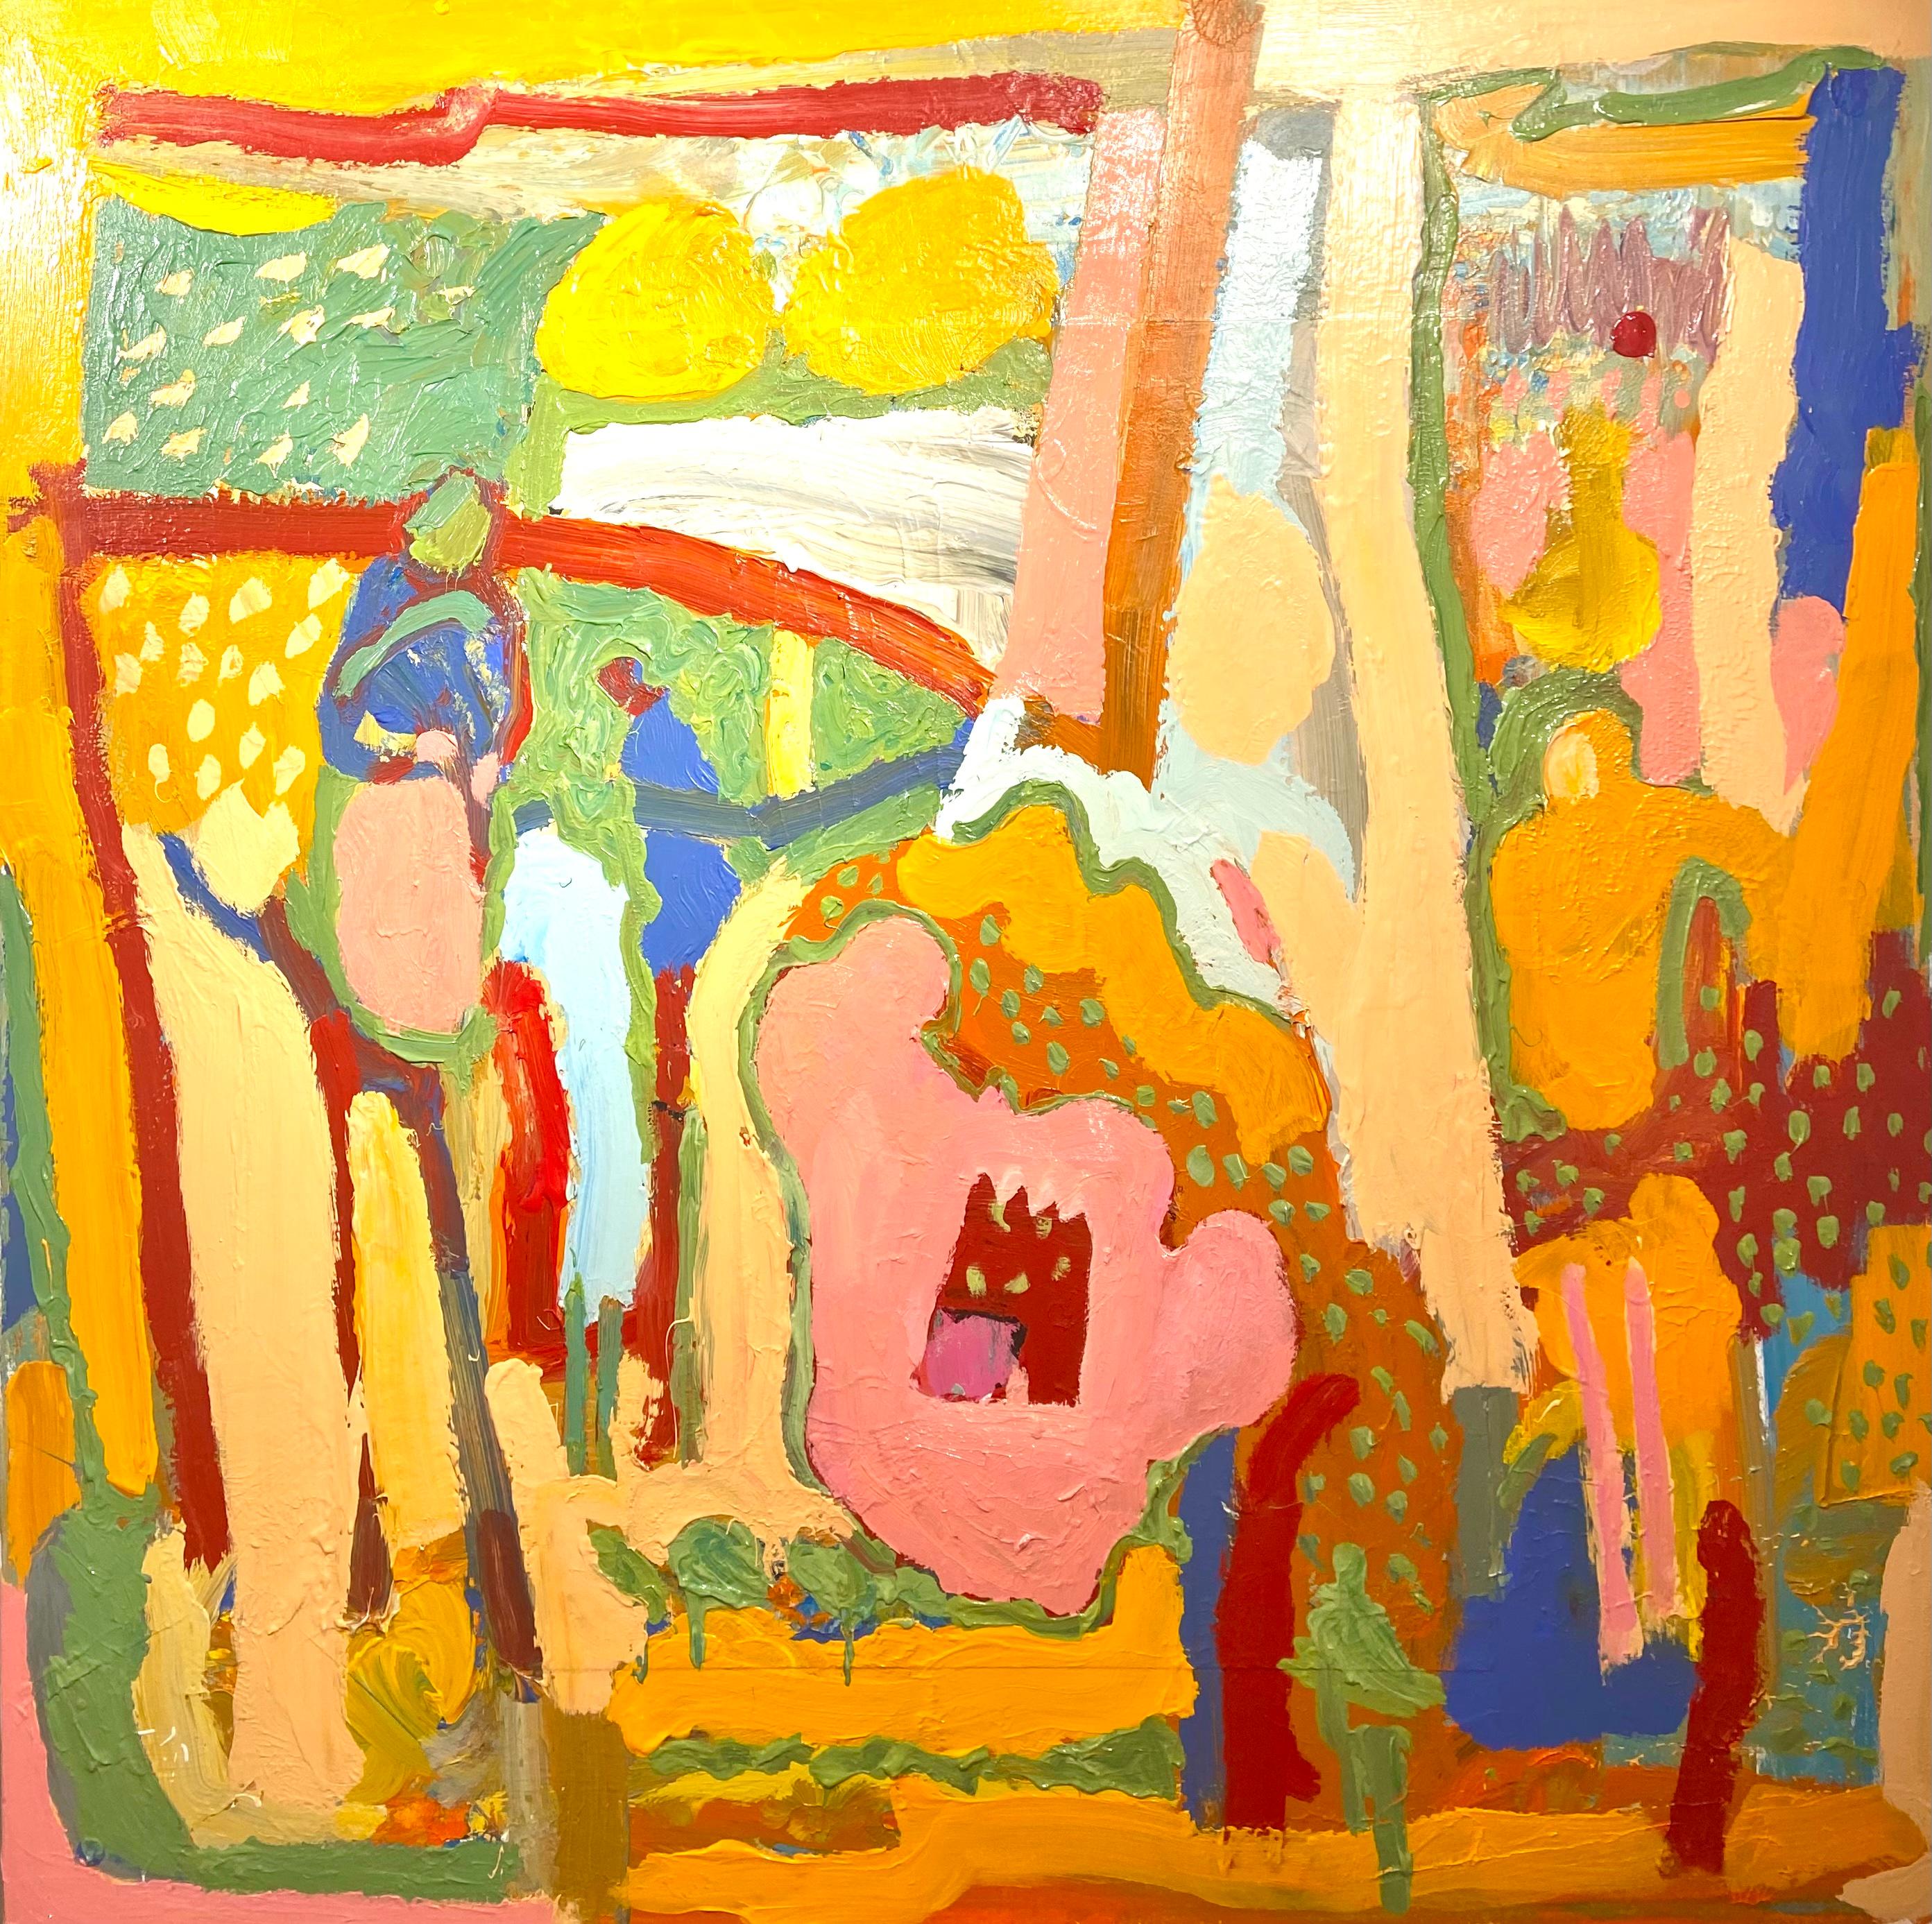 Paul wadsworth Figurative Painting - In The Gardens Of India. Large Abstract Expressionist Oil Painting